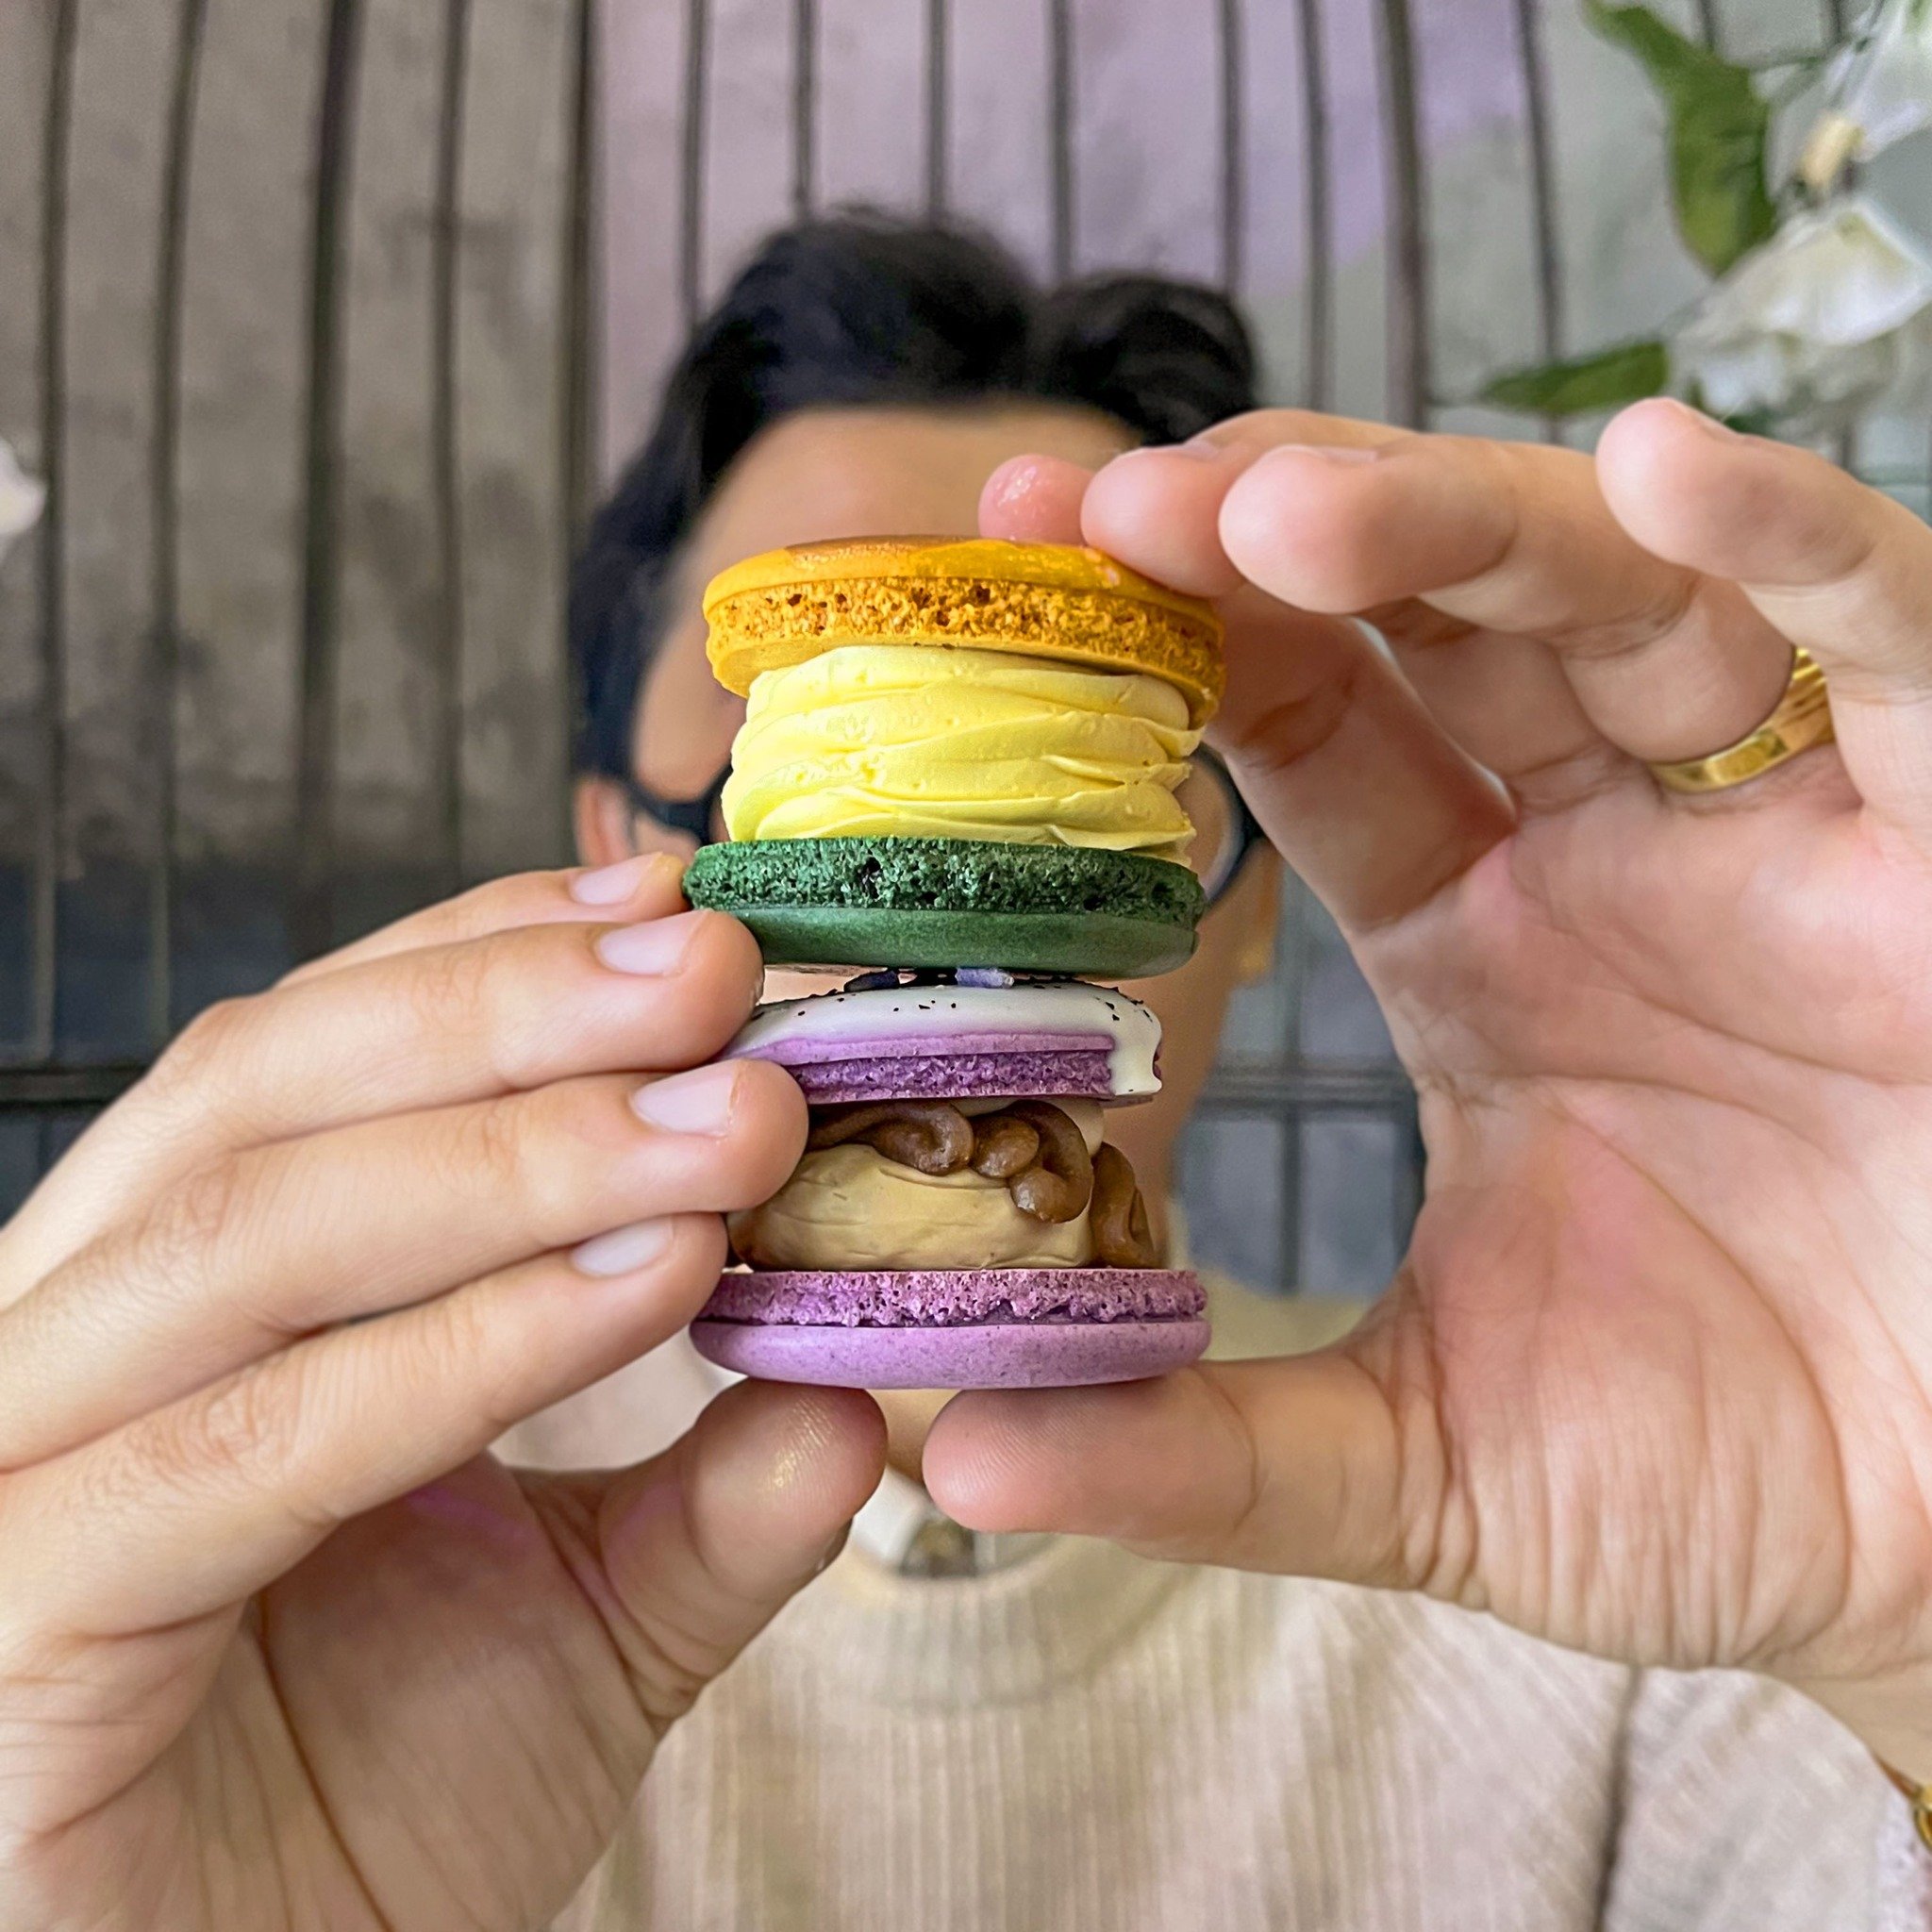 🤔What is your go-to macaron flavor? 🥭Mango or Earl Grey🫖? Why not both! 😎😎😎Treat yourself to a sweet dessert at G&auml;bi this weekend!🍰✨✨Tag your besties to join you!

🚗 Available on Uber Eats, Grubhub, &amp; Doordash for delivery! Tap the b